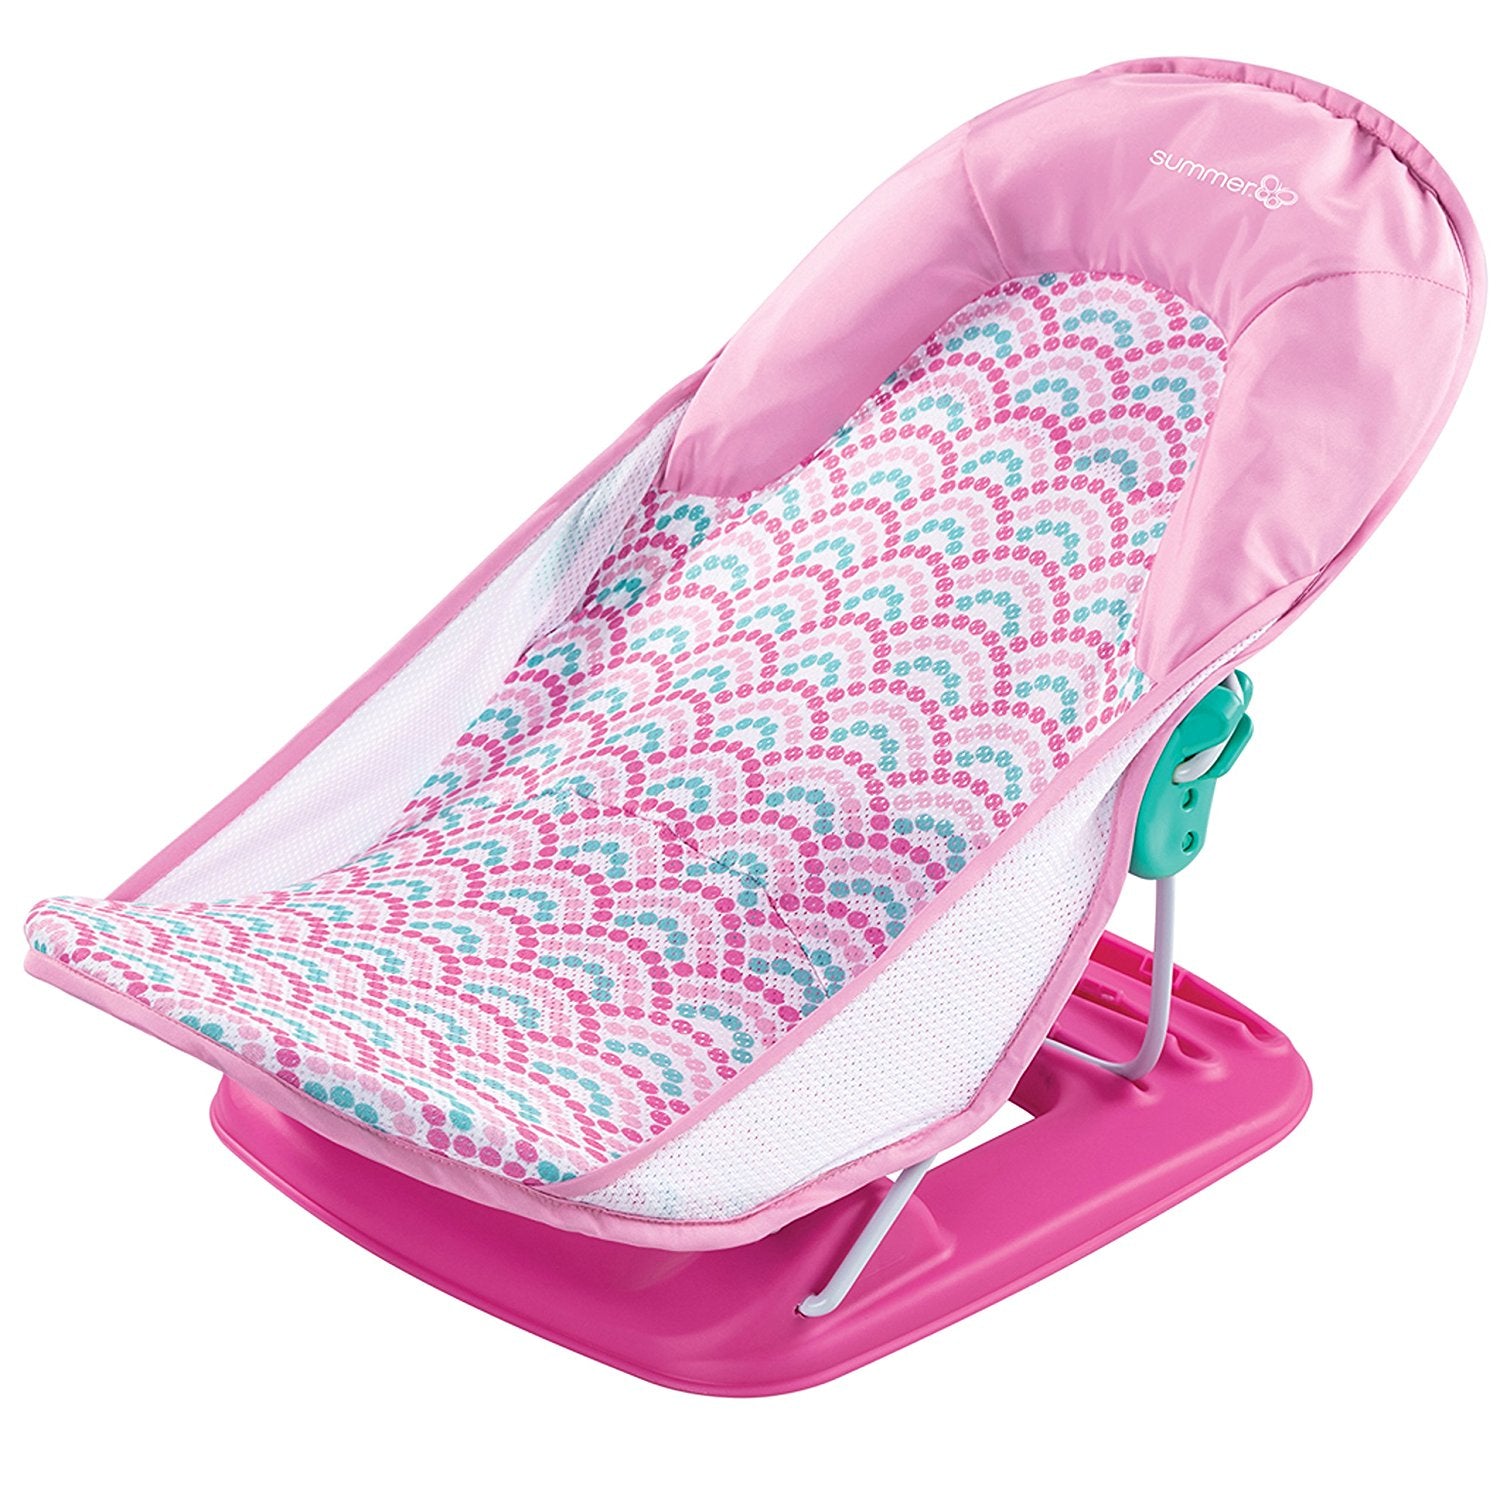 Deluxe Baby Bather - Bubble Waves